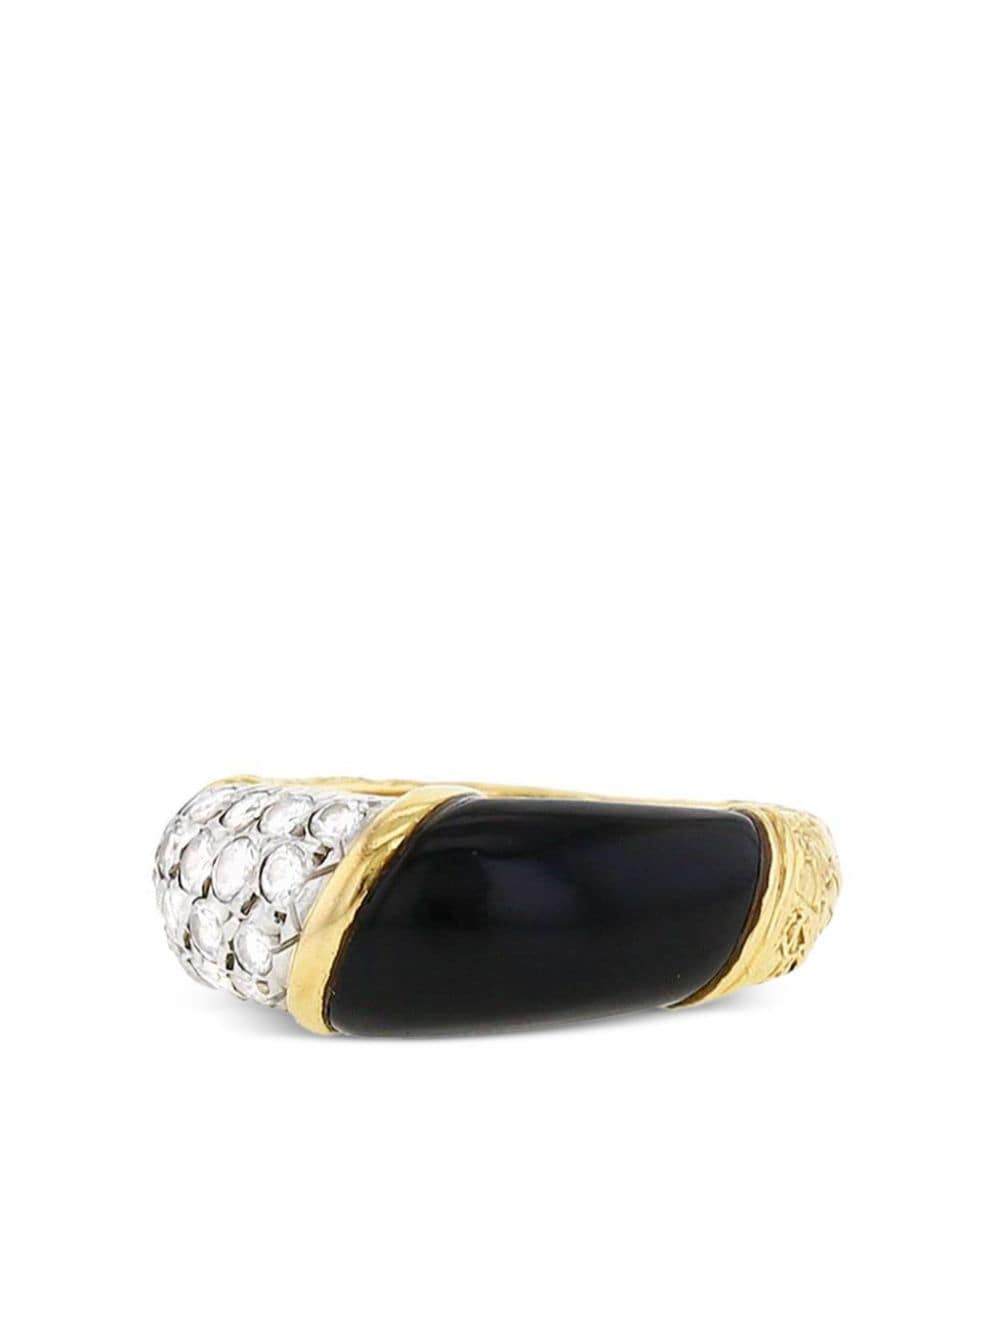 Pre-owned Van Cleef & Arpels 1970s Yellow Gold Onyx And Diamond Ring